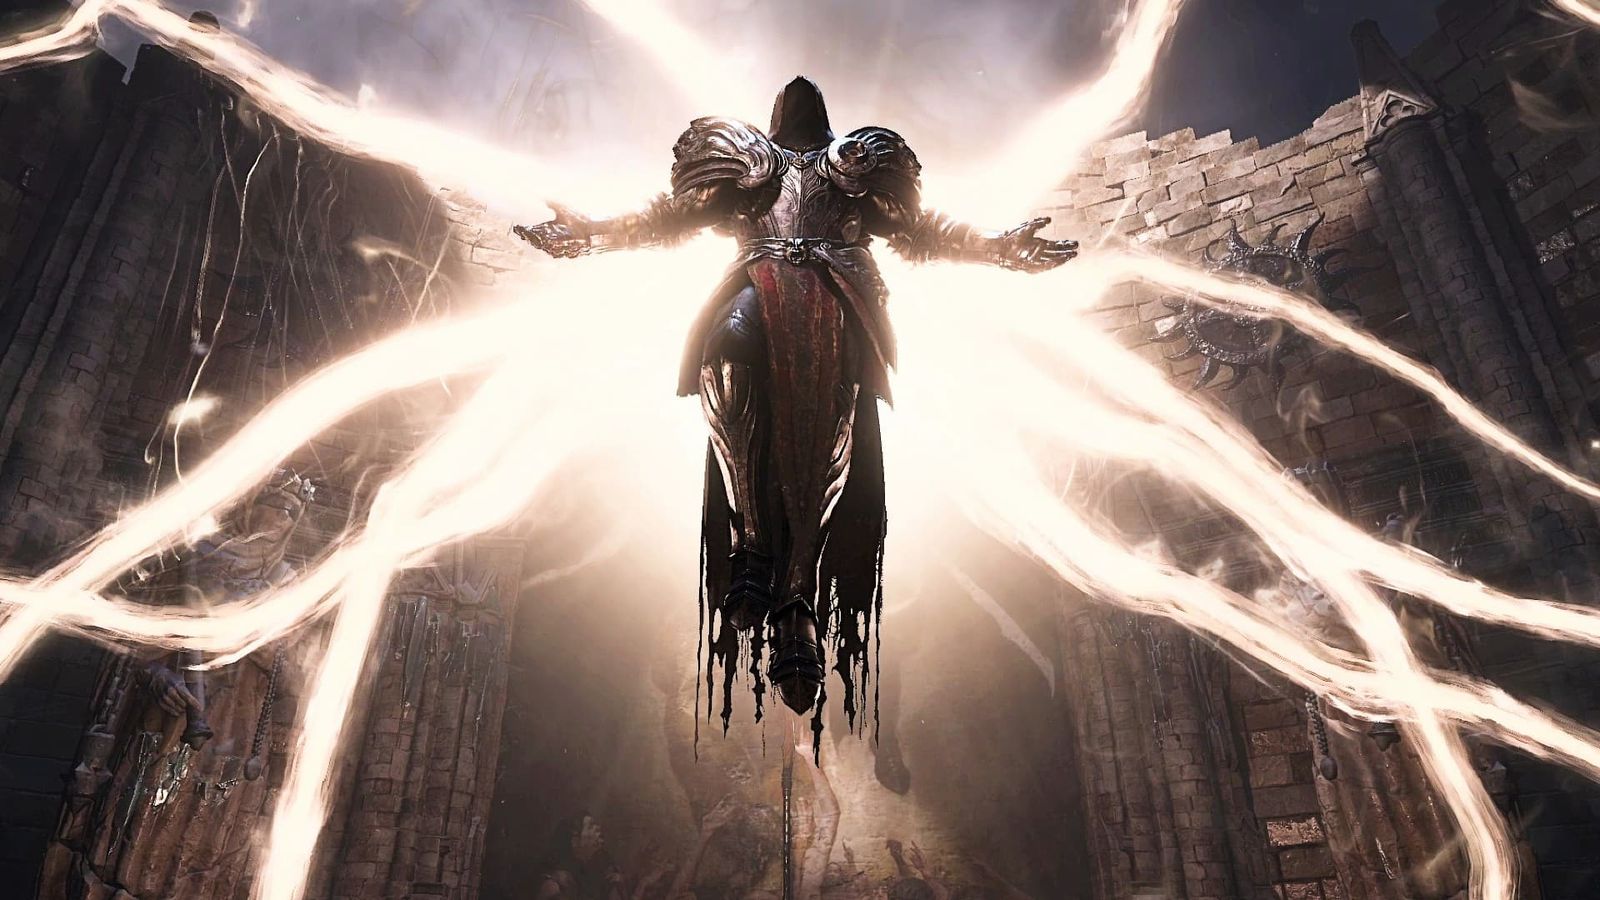 A flying character with glowing tendrils coming from him, a Diablo 4 promotional image.